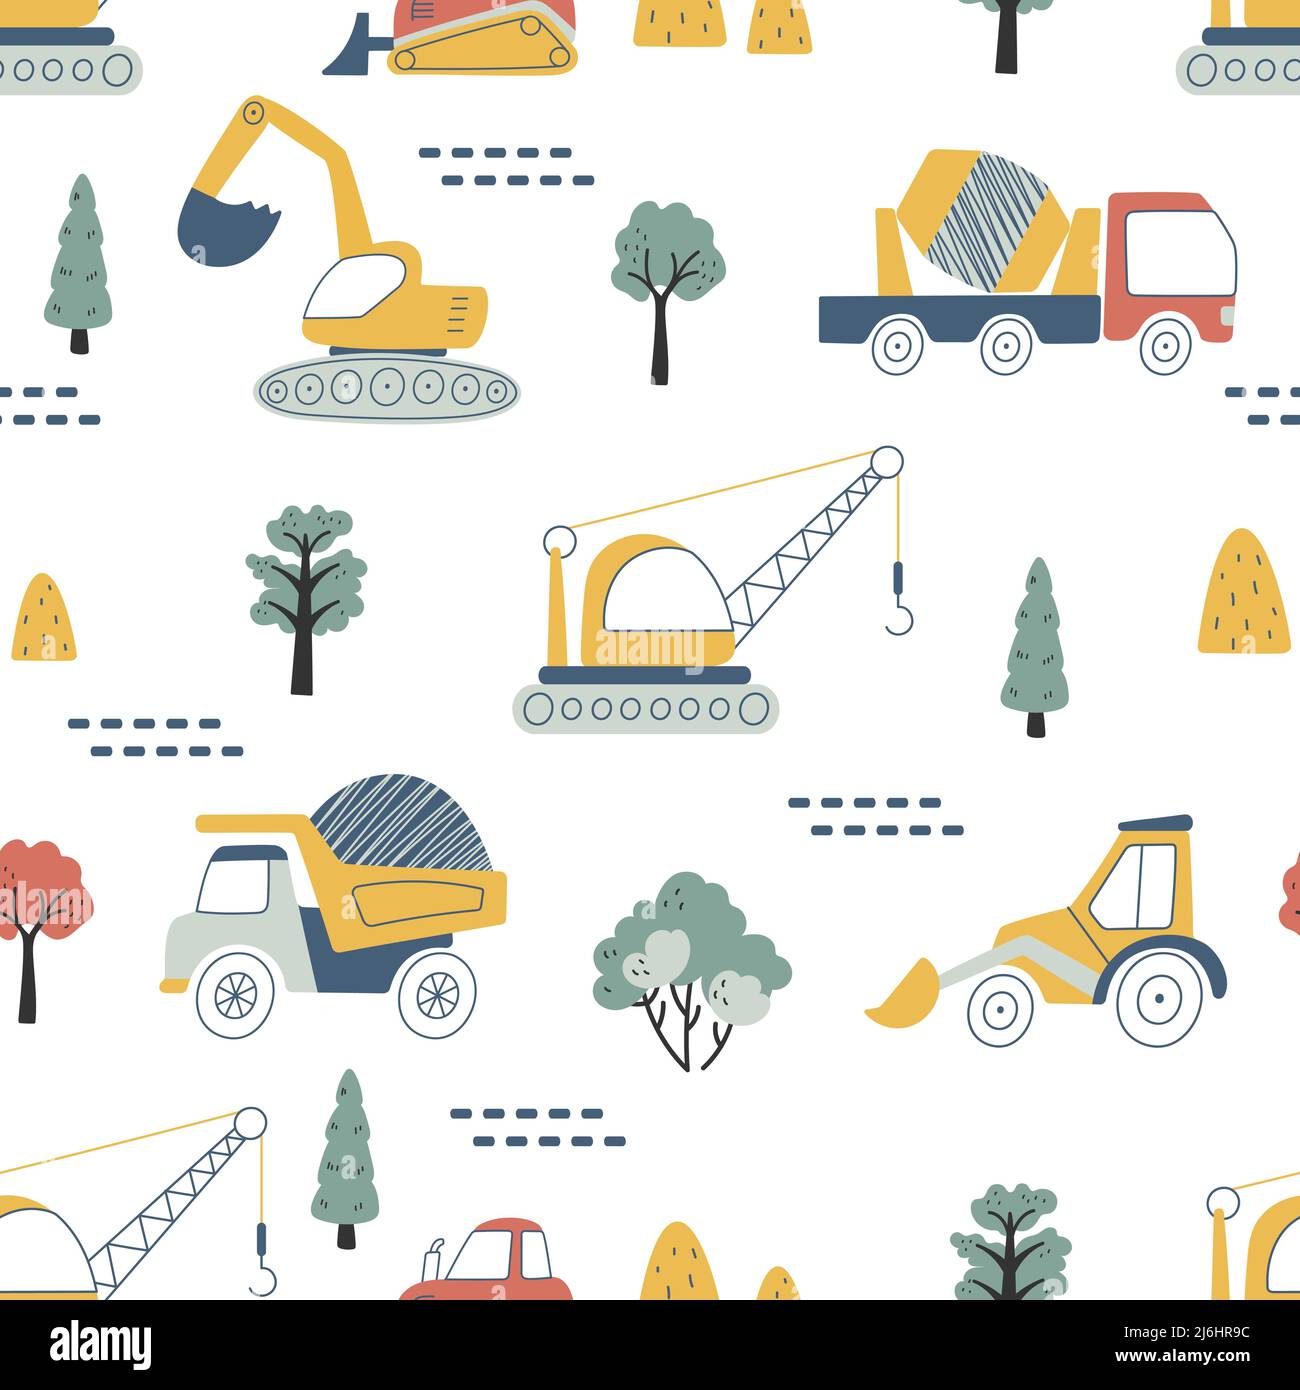 Kids truck seamless pattern. Doodle trucks, construction vehicles with ...